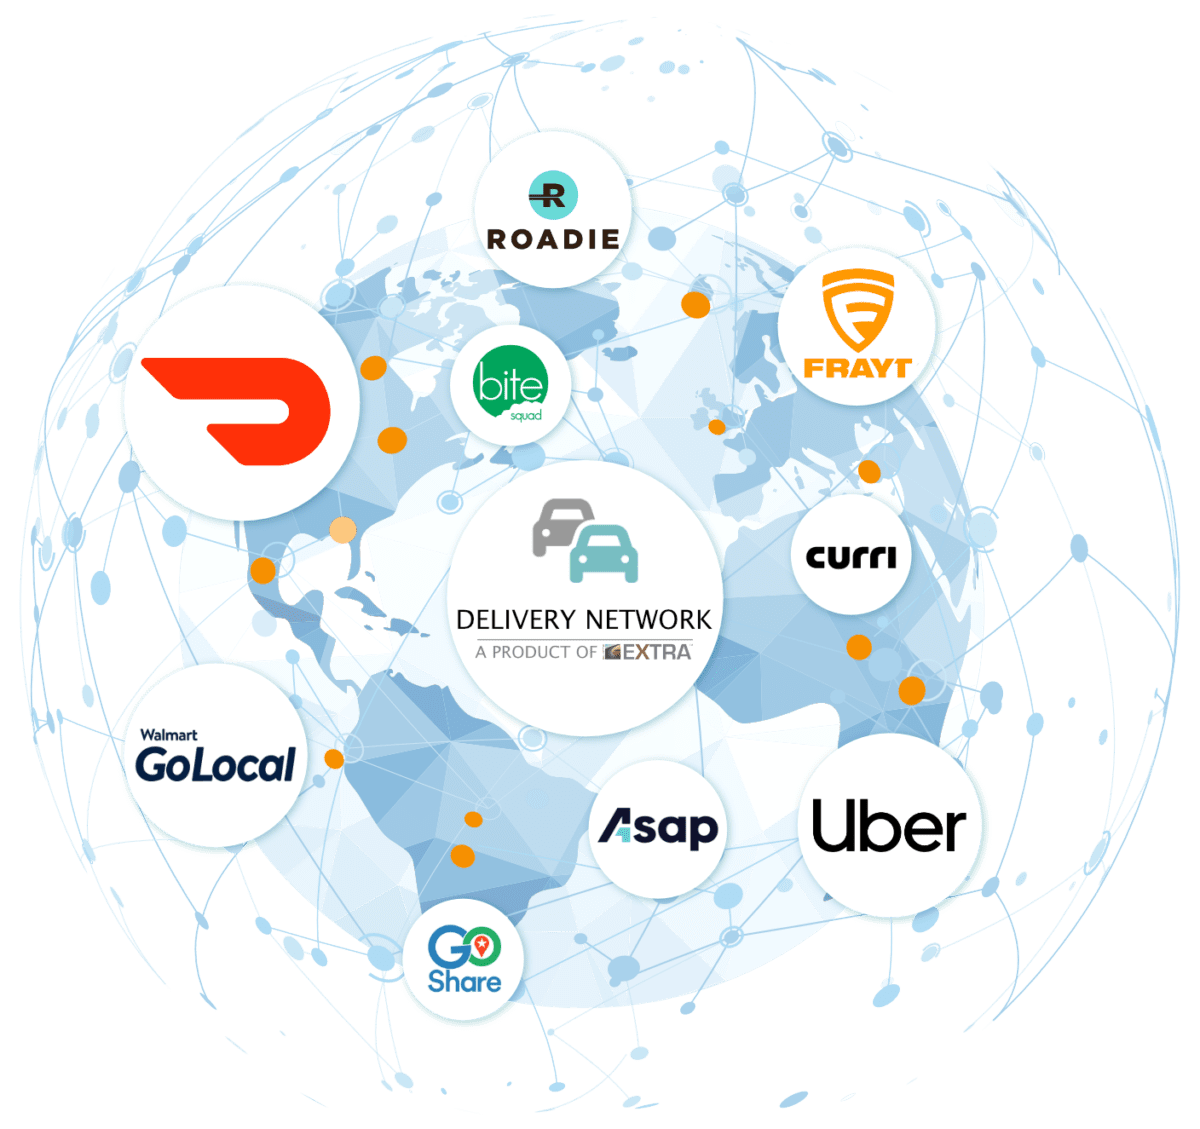 A globe network diagram showing the logos of the delivery providers on Elite EXTRA's Delivery Network